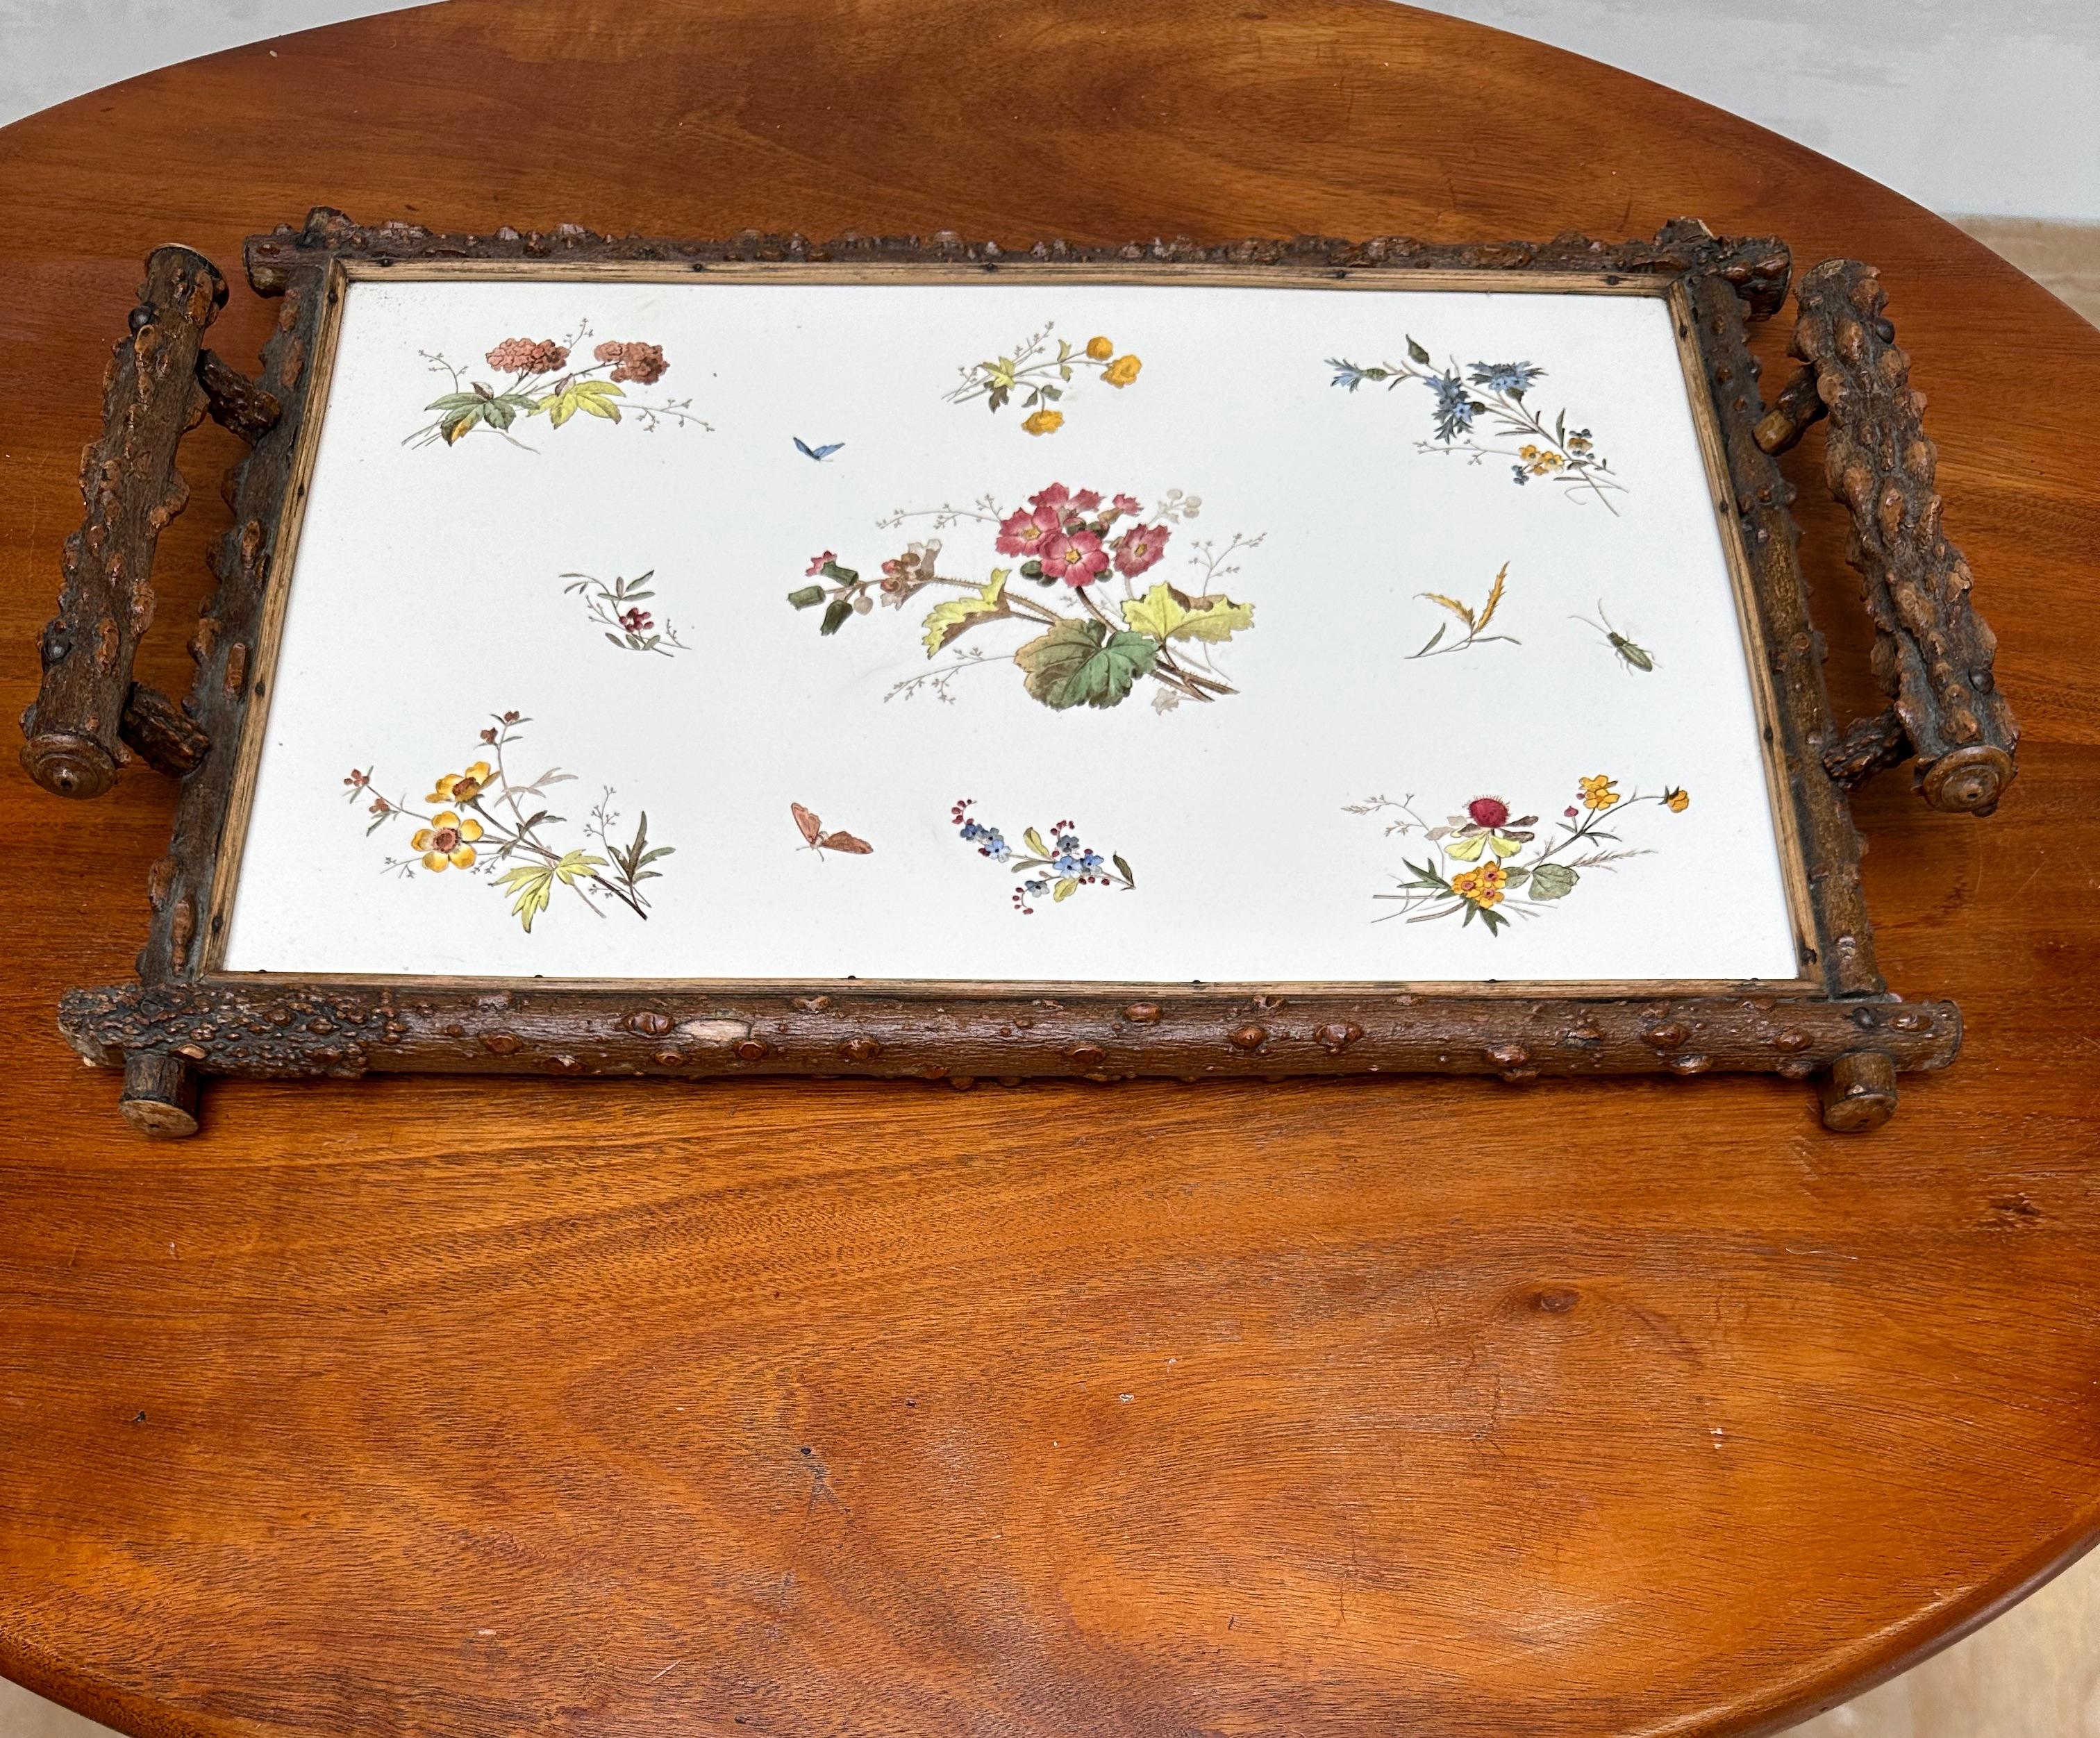 Rare and beautifully hand painted and glazed, porcelain tile in superb condition with branches frame serving tray.

This beautiful quality and marvelous design tile serving tray is another one of our recent decorative finds and an absolute joy to